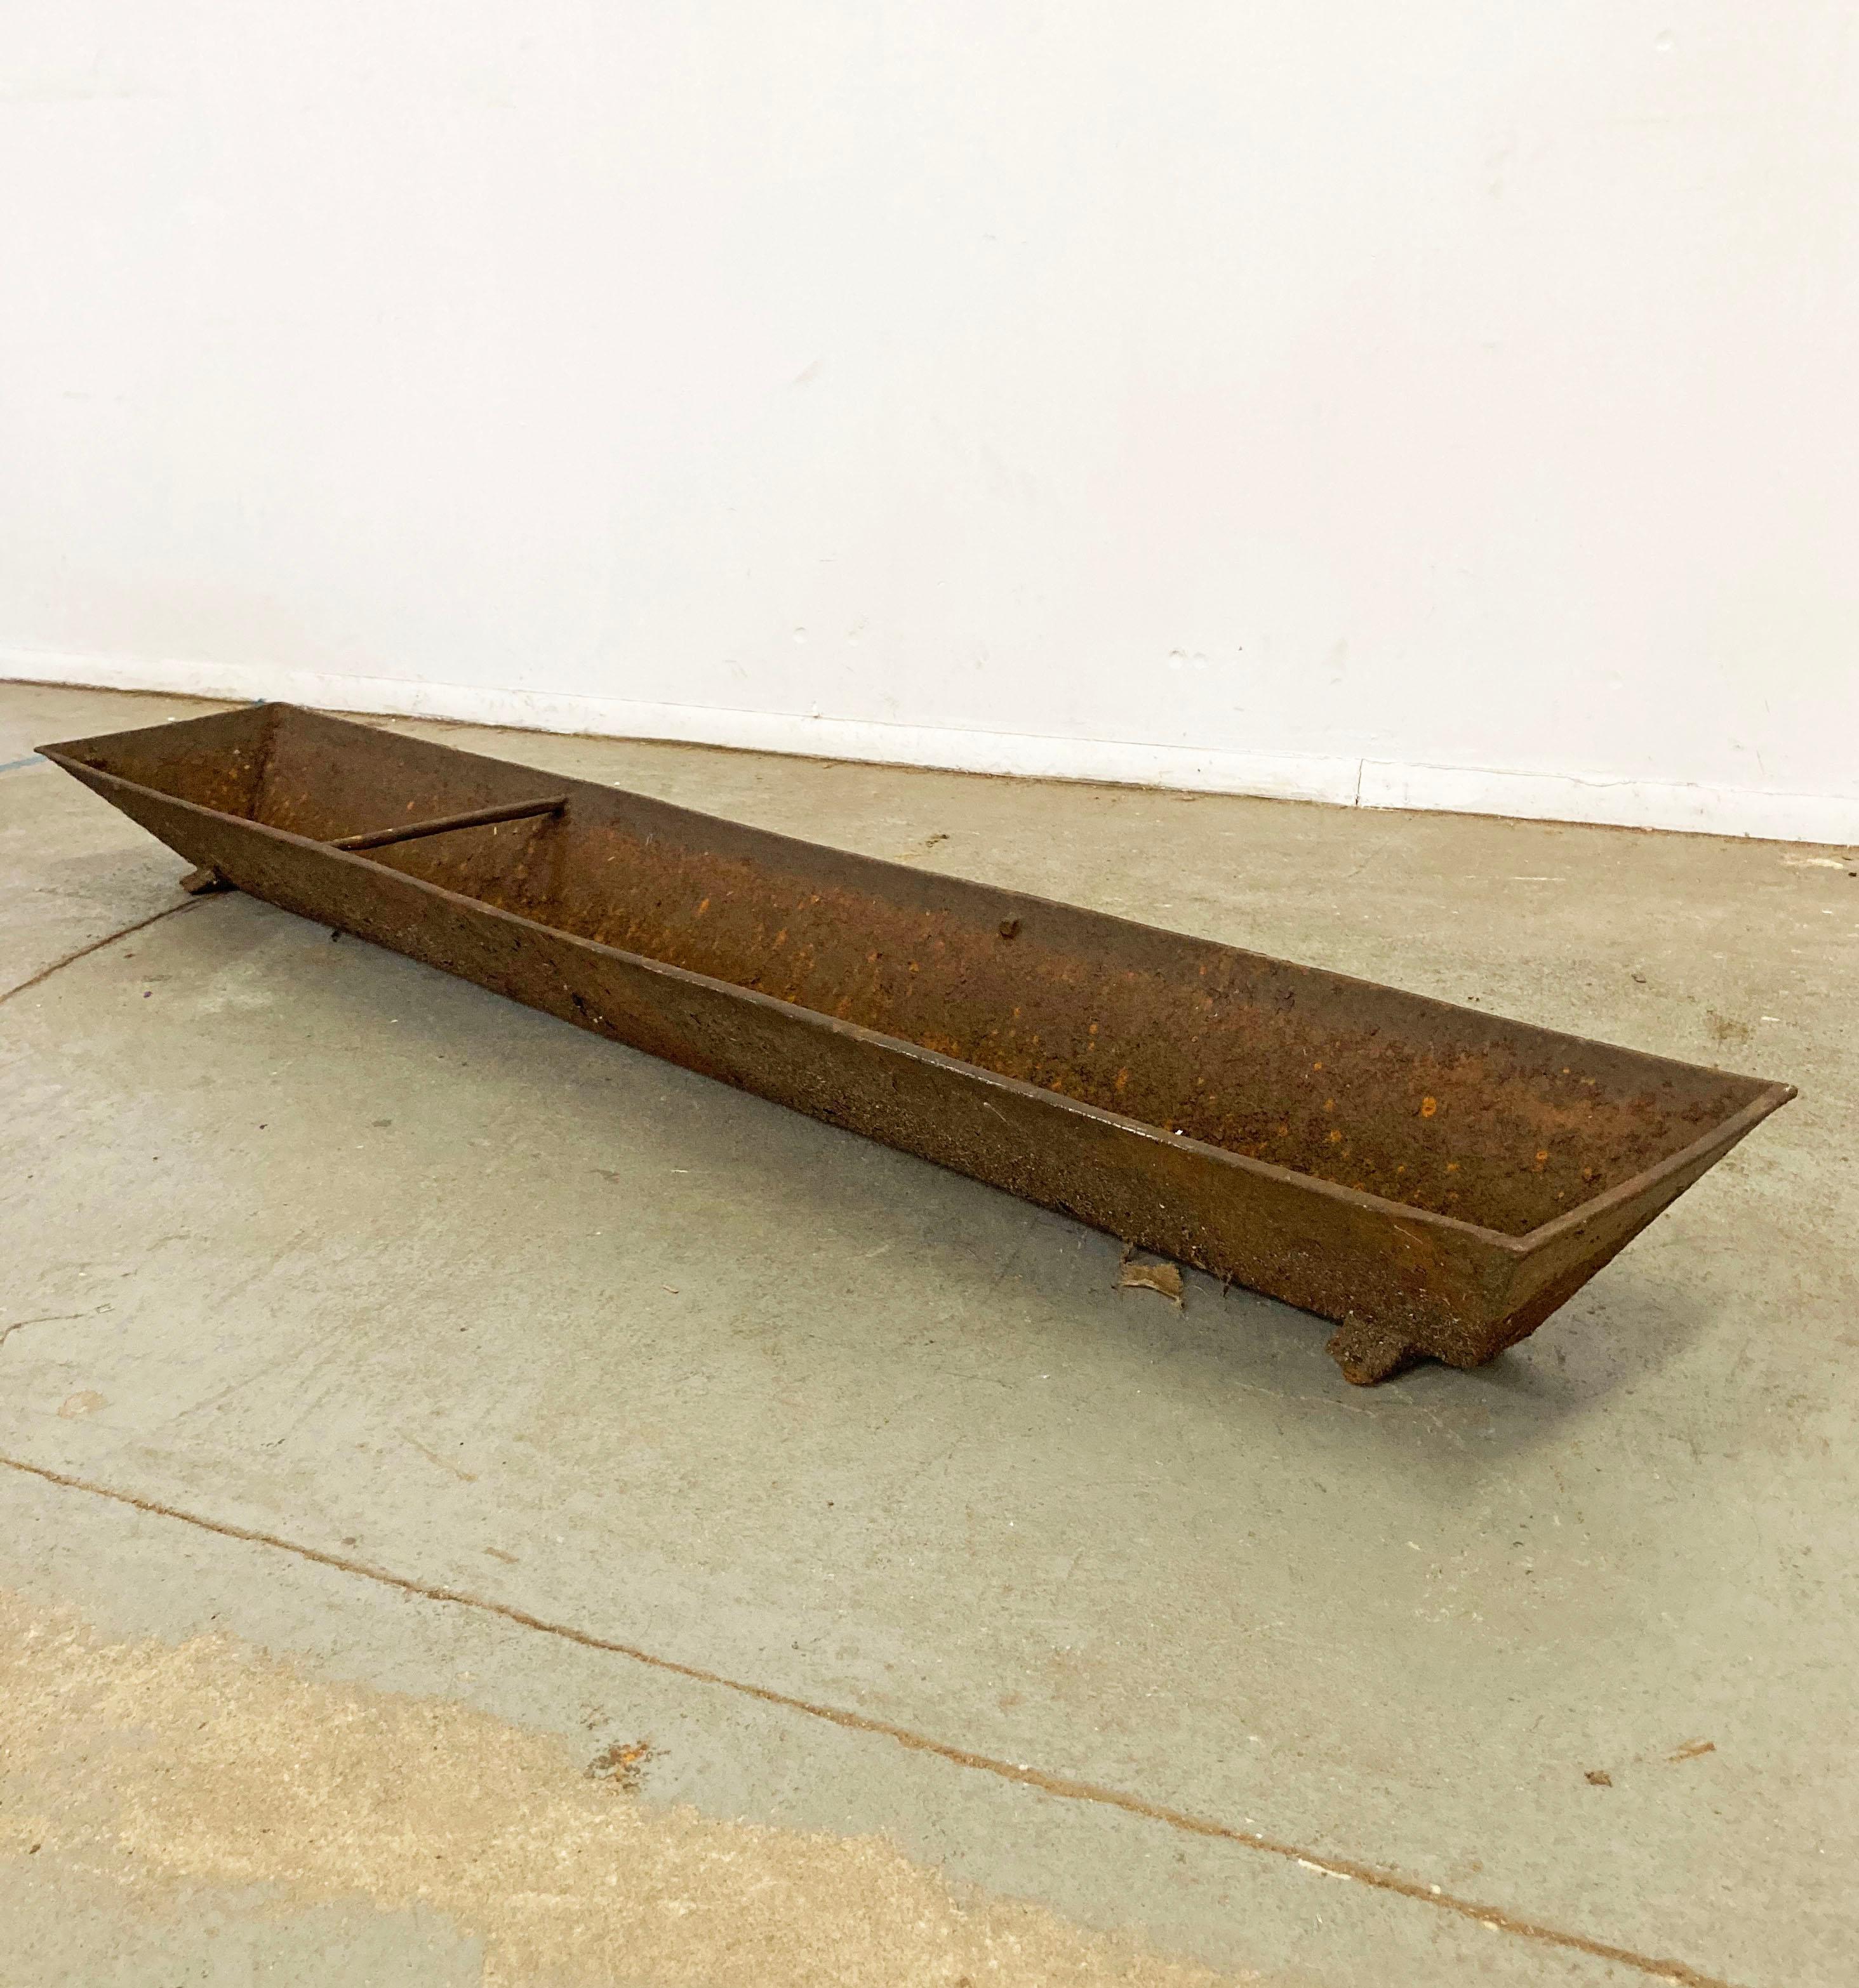 Offered is an antique cast iron feeding trough. Has feet and a middle bar. Considering its age, this piece is in decent condition but shows obvious age wear, including rusting and chips. It is not signed. It is 73